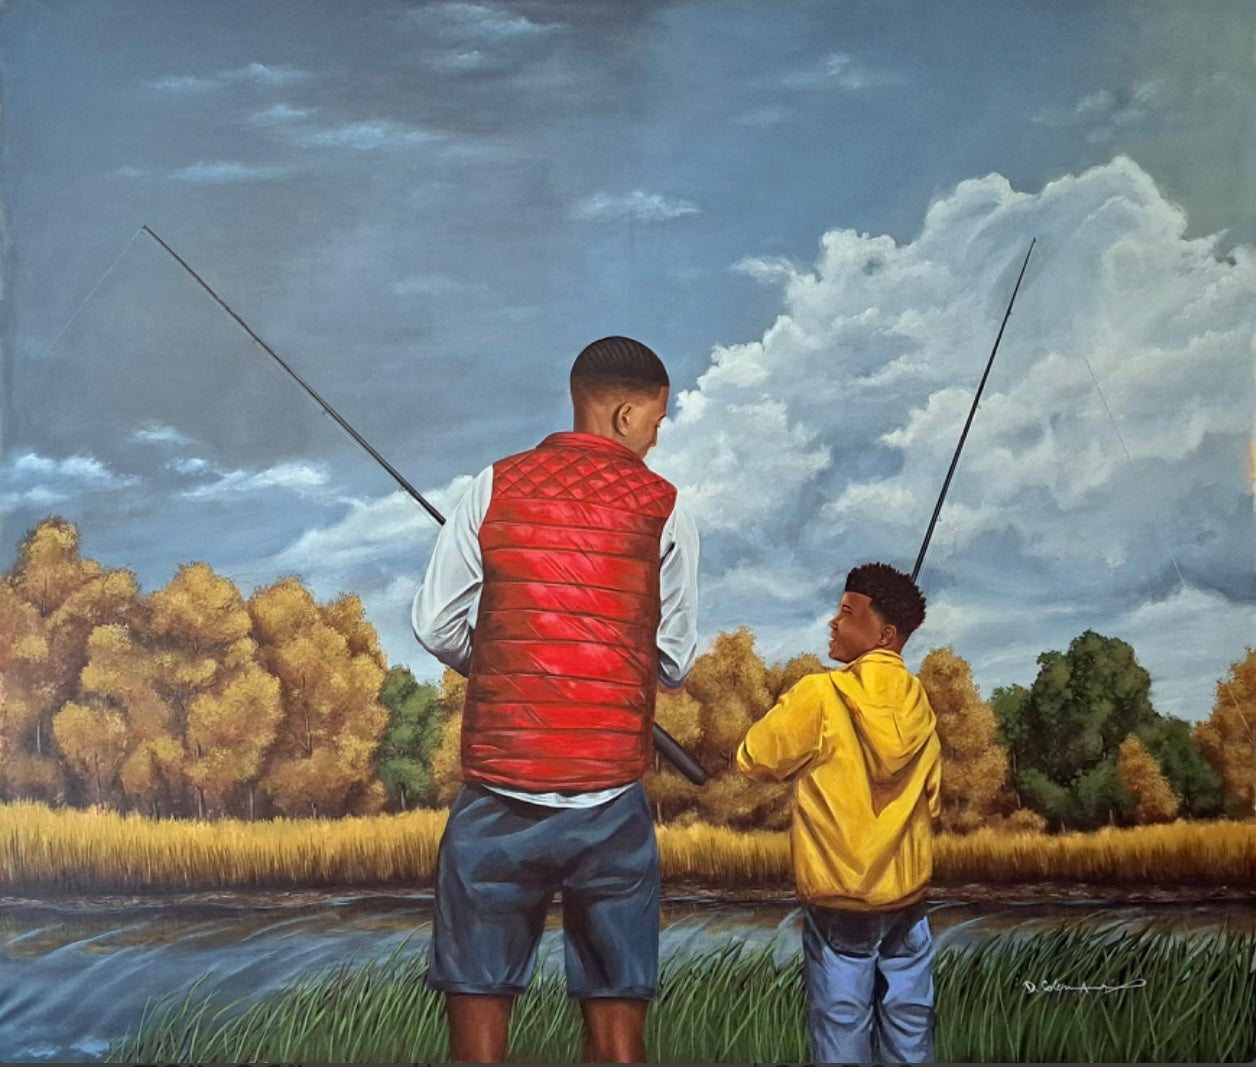 “A Father’s Lesson” by Dana Coleman